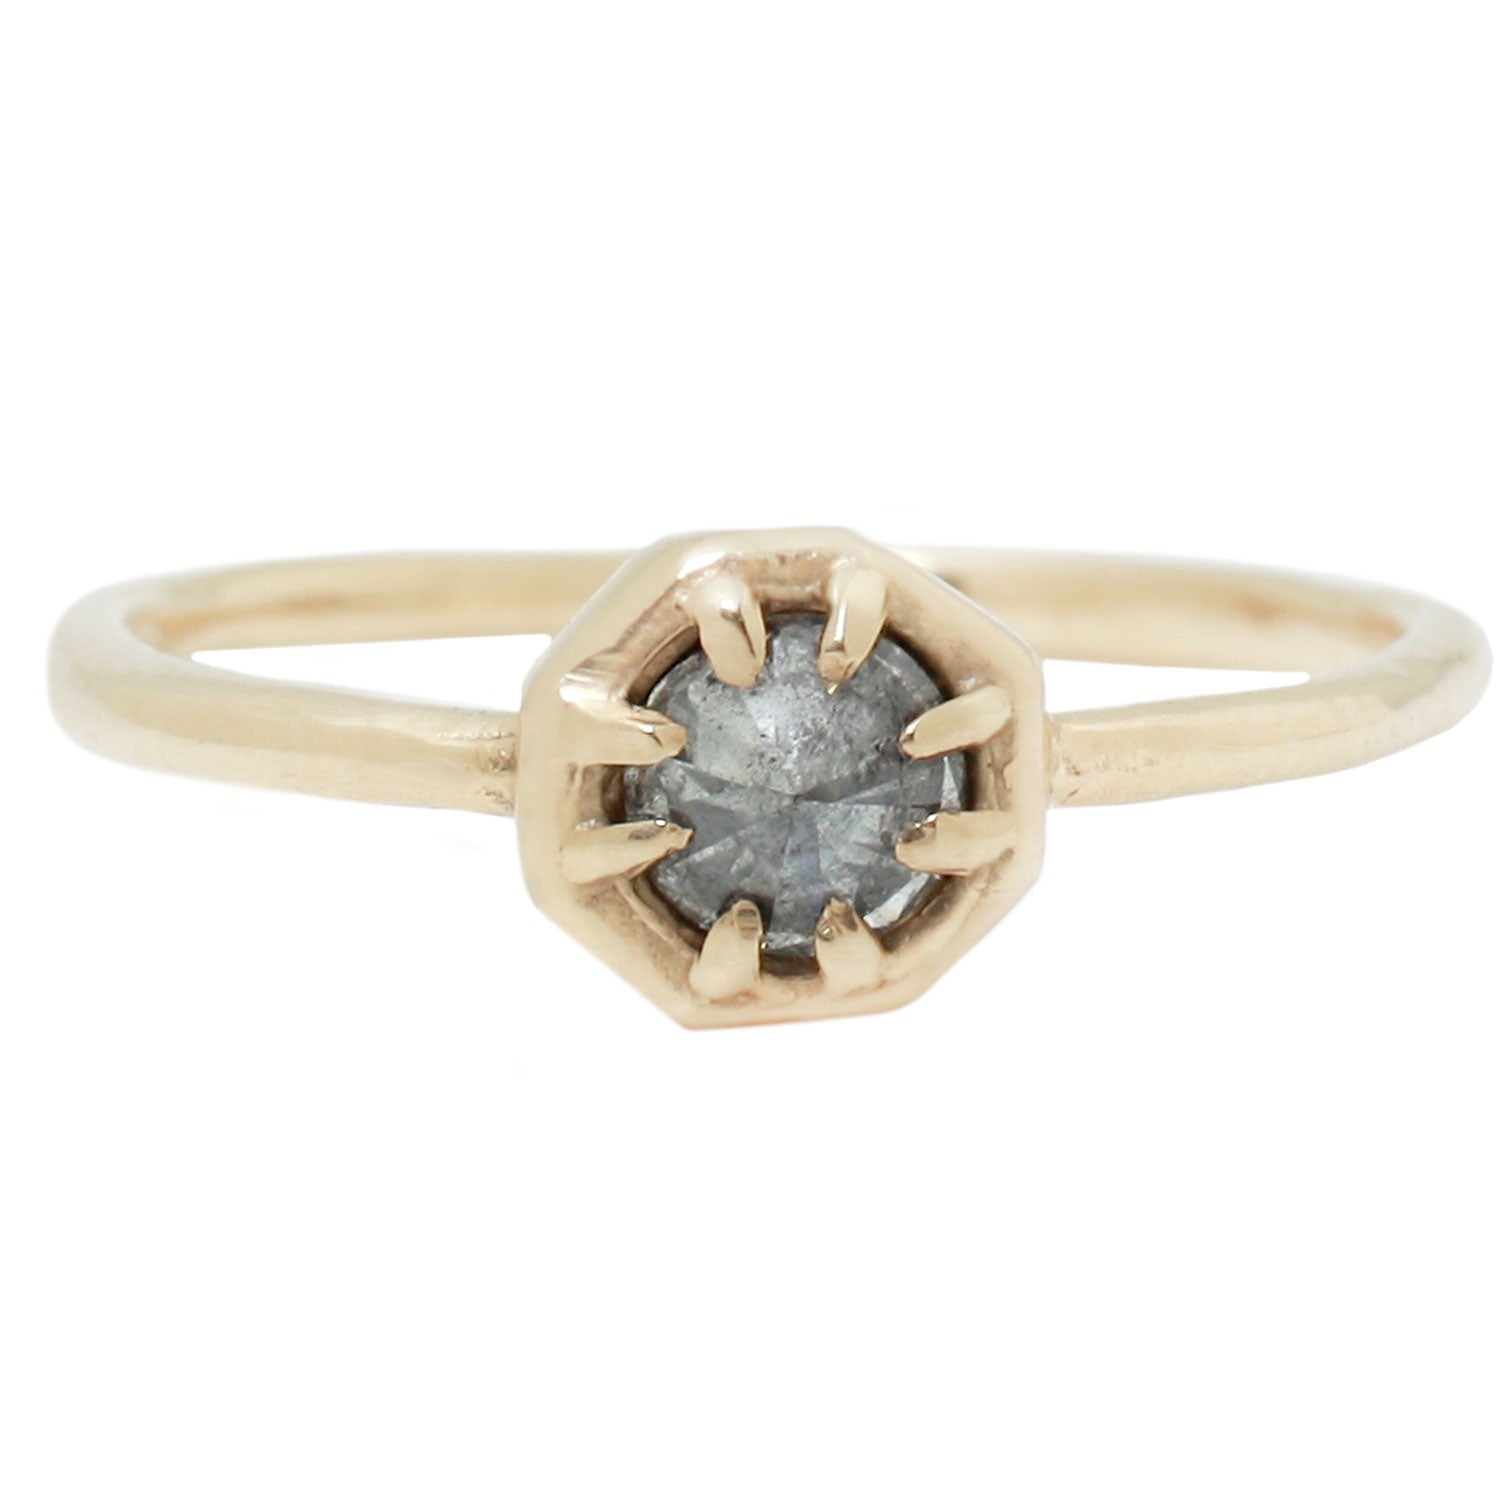 Lauren Wolf Jewelry - Tiny Gray Diamond Solitaire Ring Set in Yellow Gold